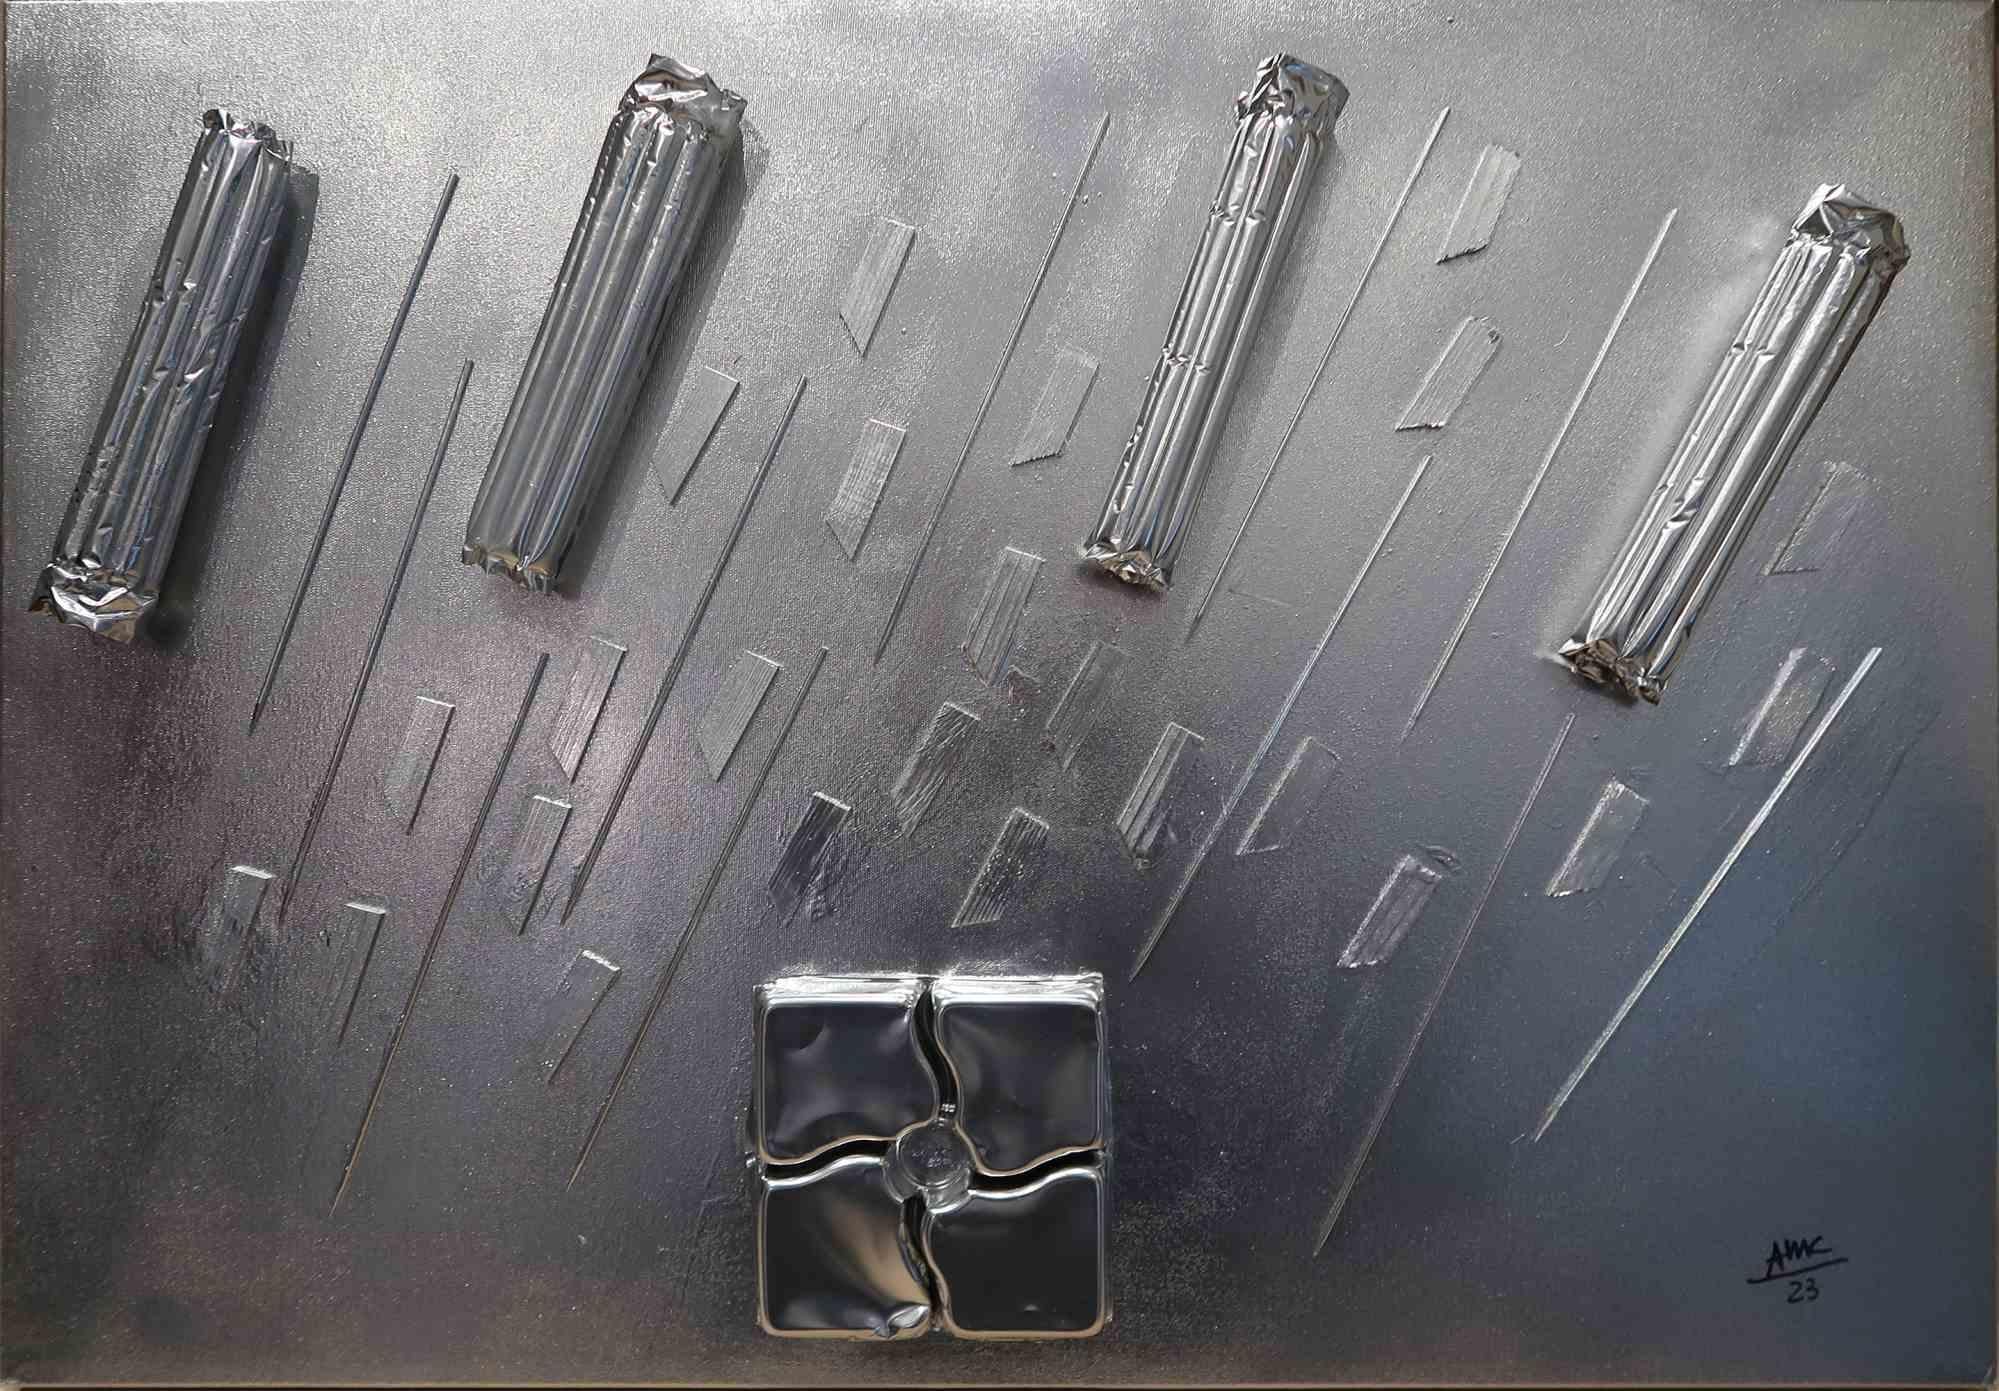 A Hard Rain's Gonna Fall is a fascinating painting by the Italian artist Anna Maria Caboni.

It is a metaphor for the contemporary First-World city, where everything is metallic, and the structures are made of recycled plastic. This enchanting